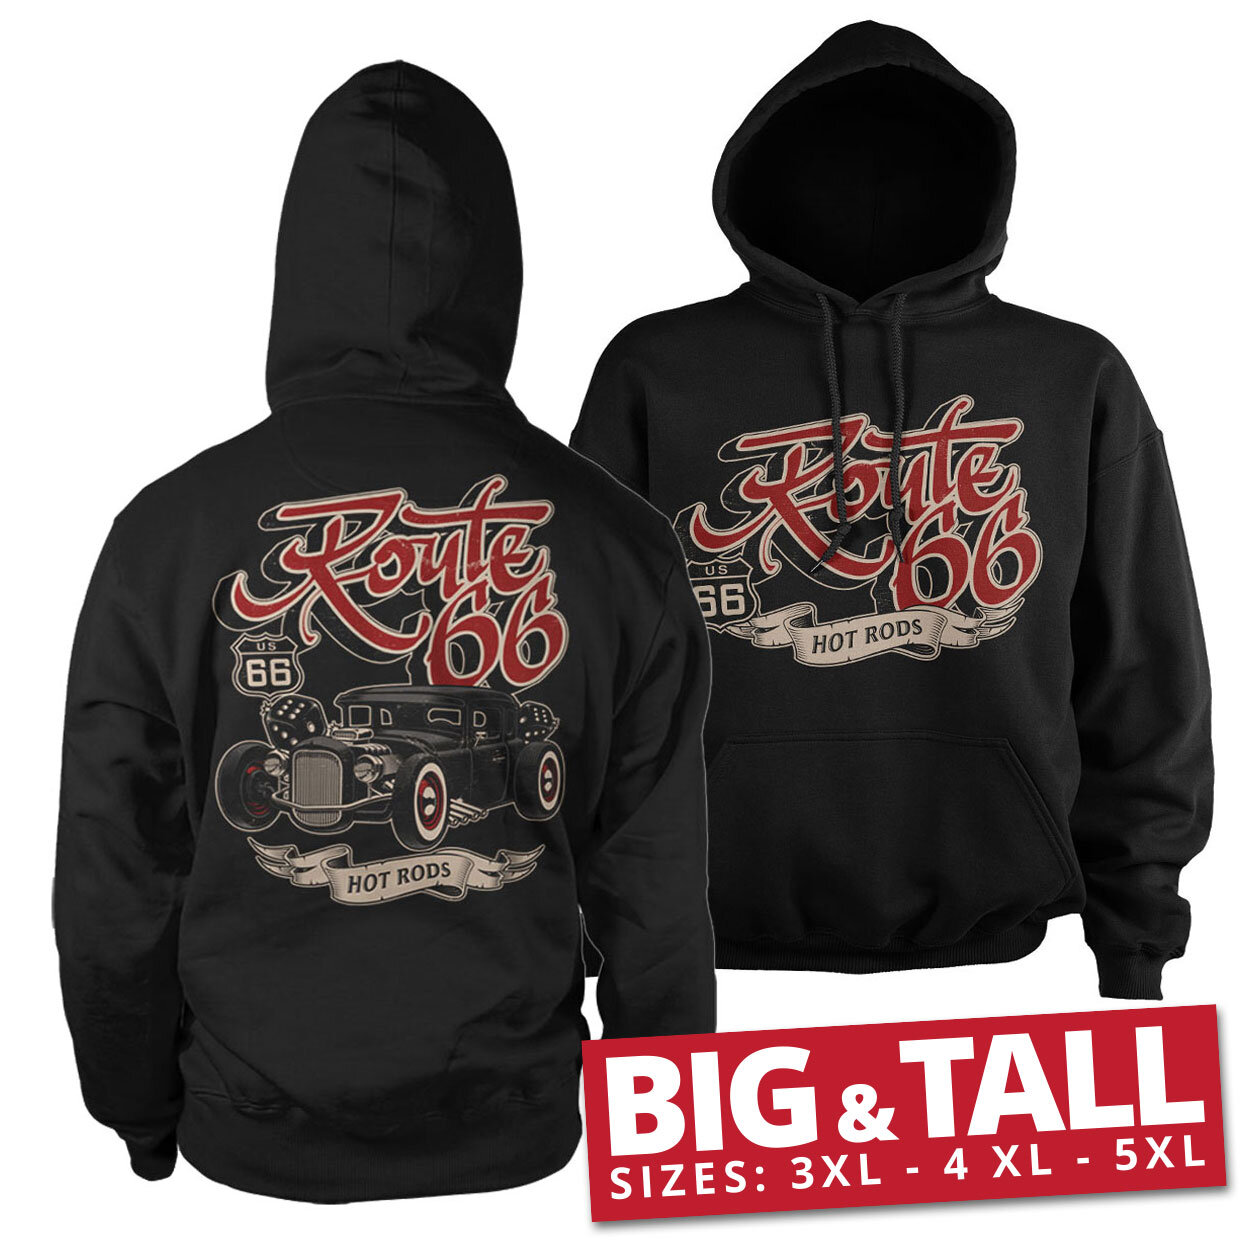 US 66 Hot Rods Big & Tall Hoodie